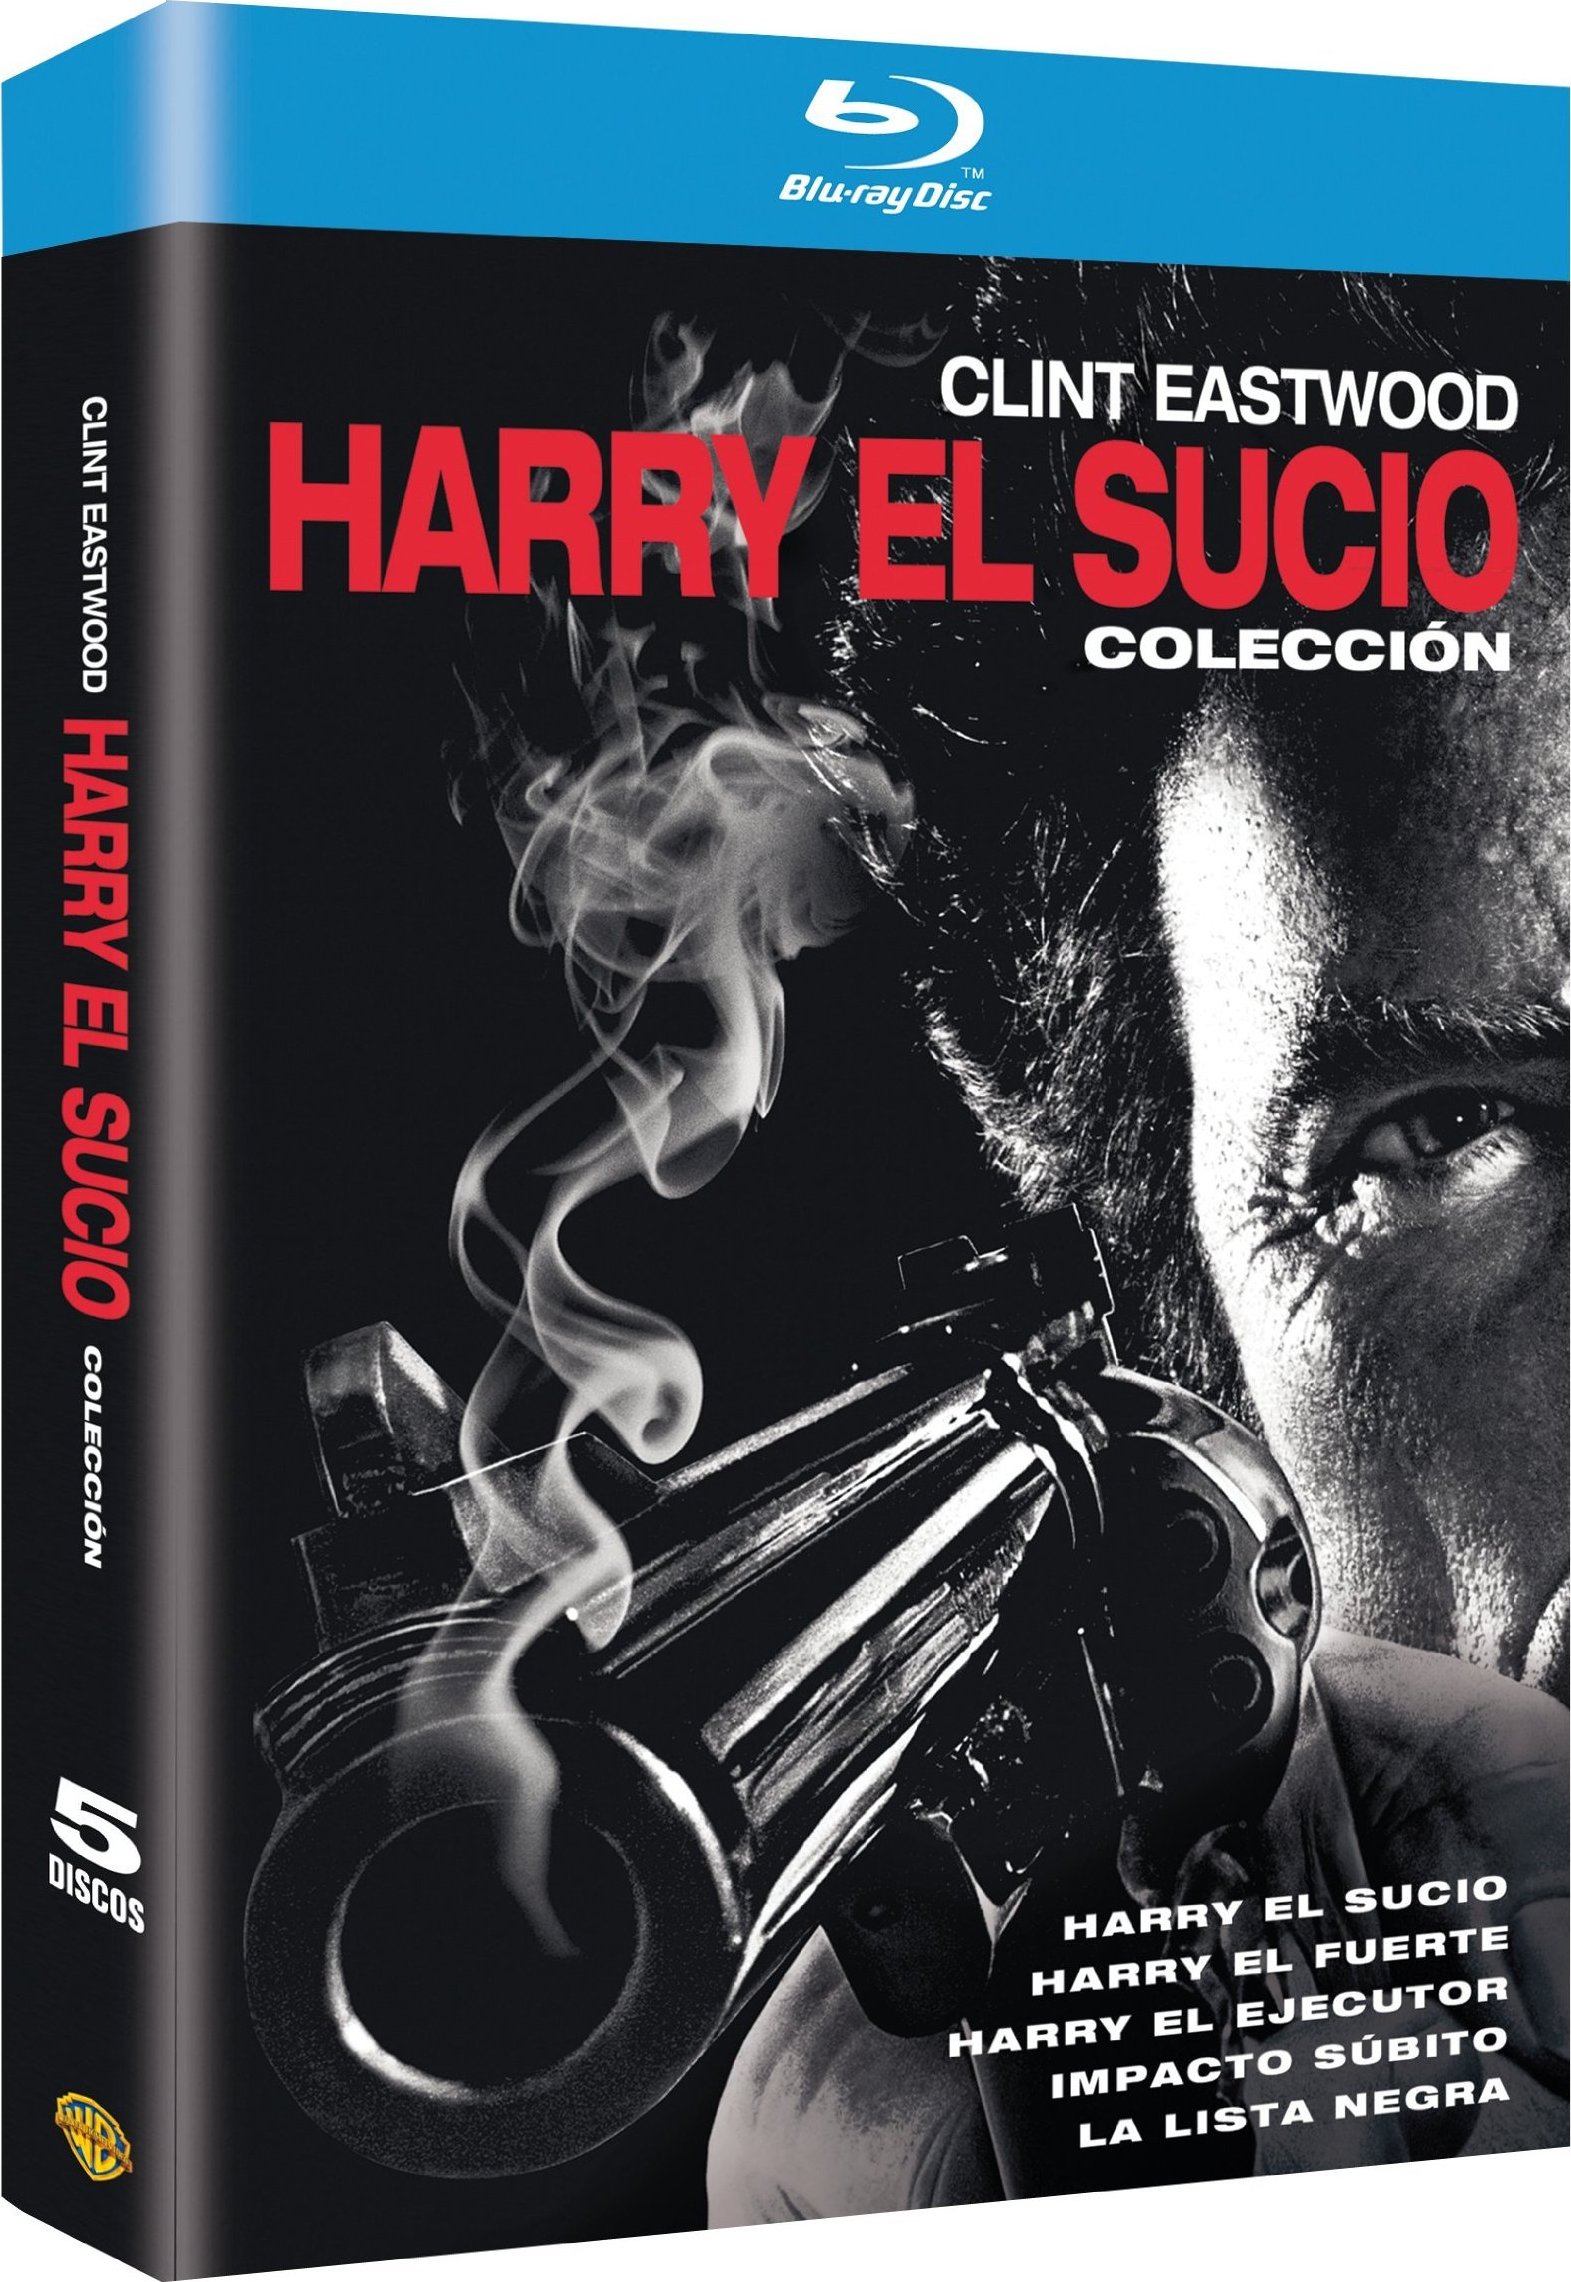 Dirty Harry Collection Blu-ray (Dirty Harry / Magnum Force / The